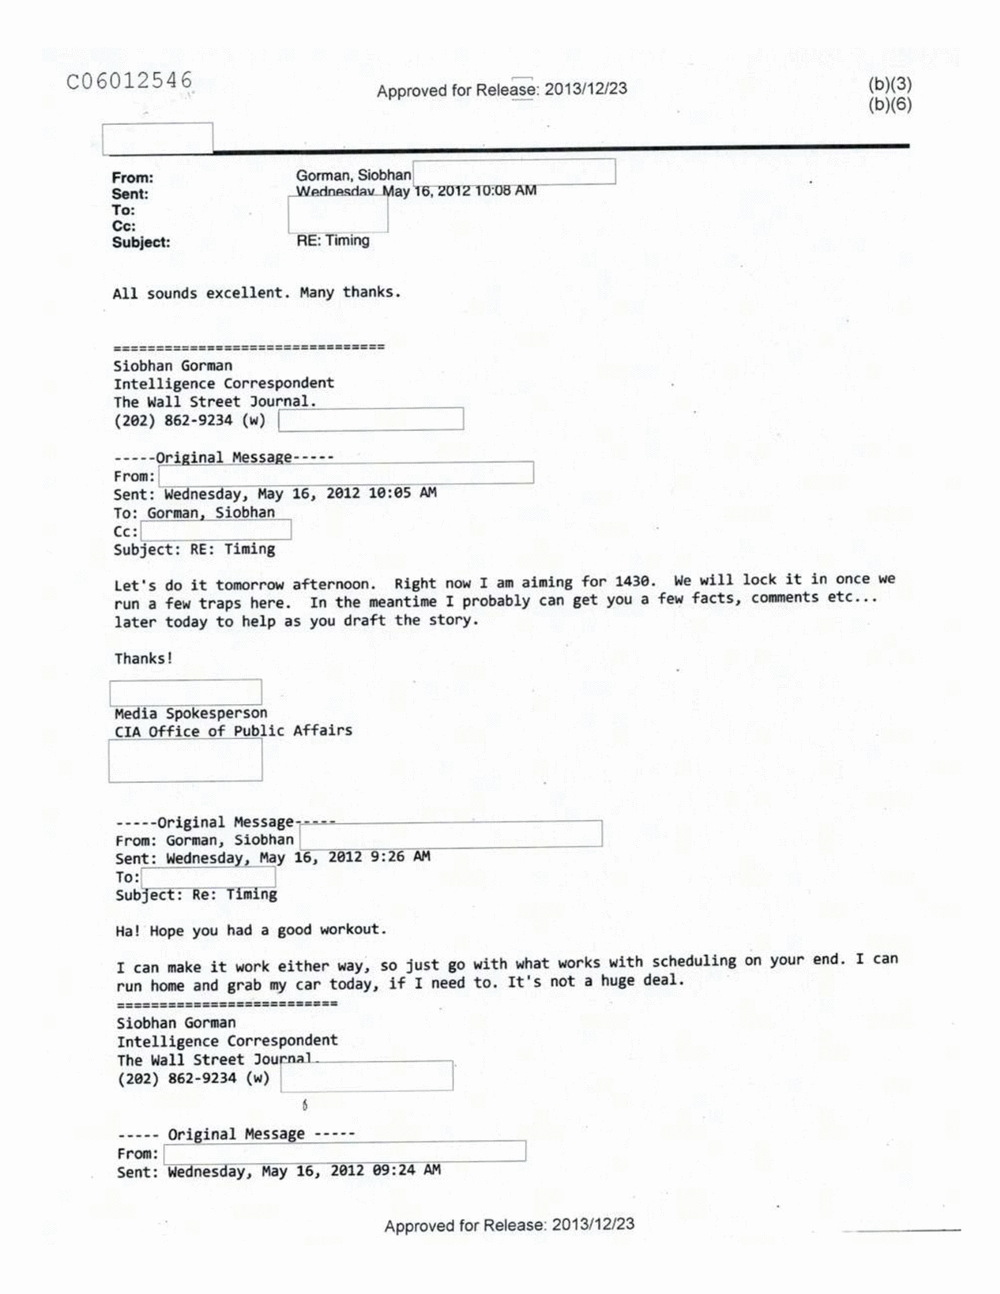 Page 80 from Email Correspondence Between Reporters and CIA Flacks